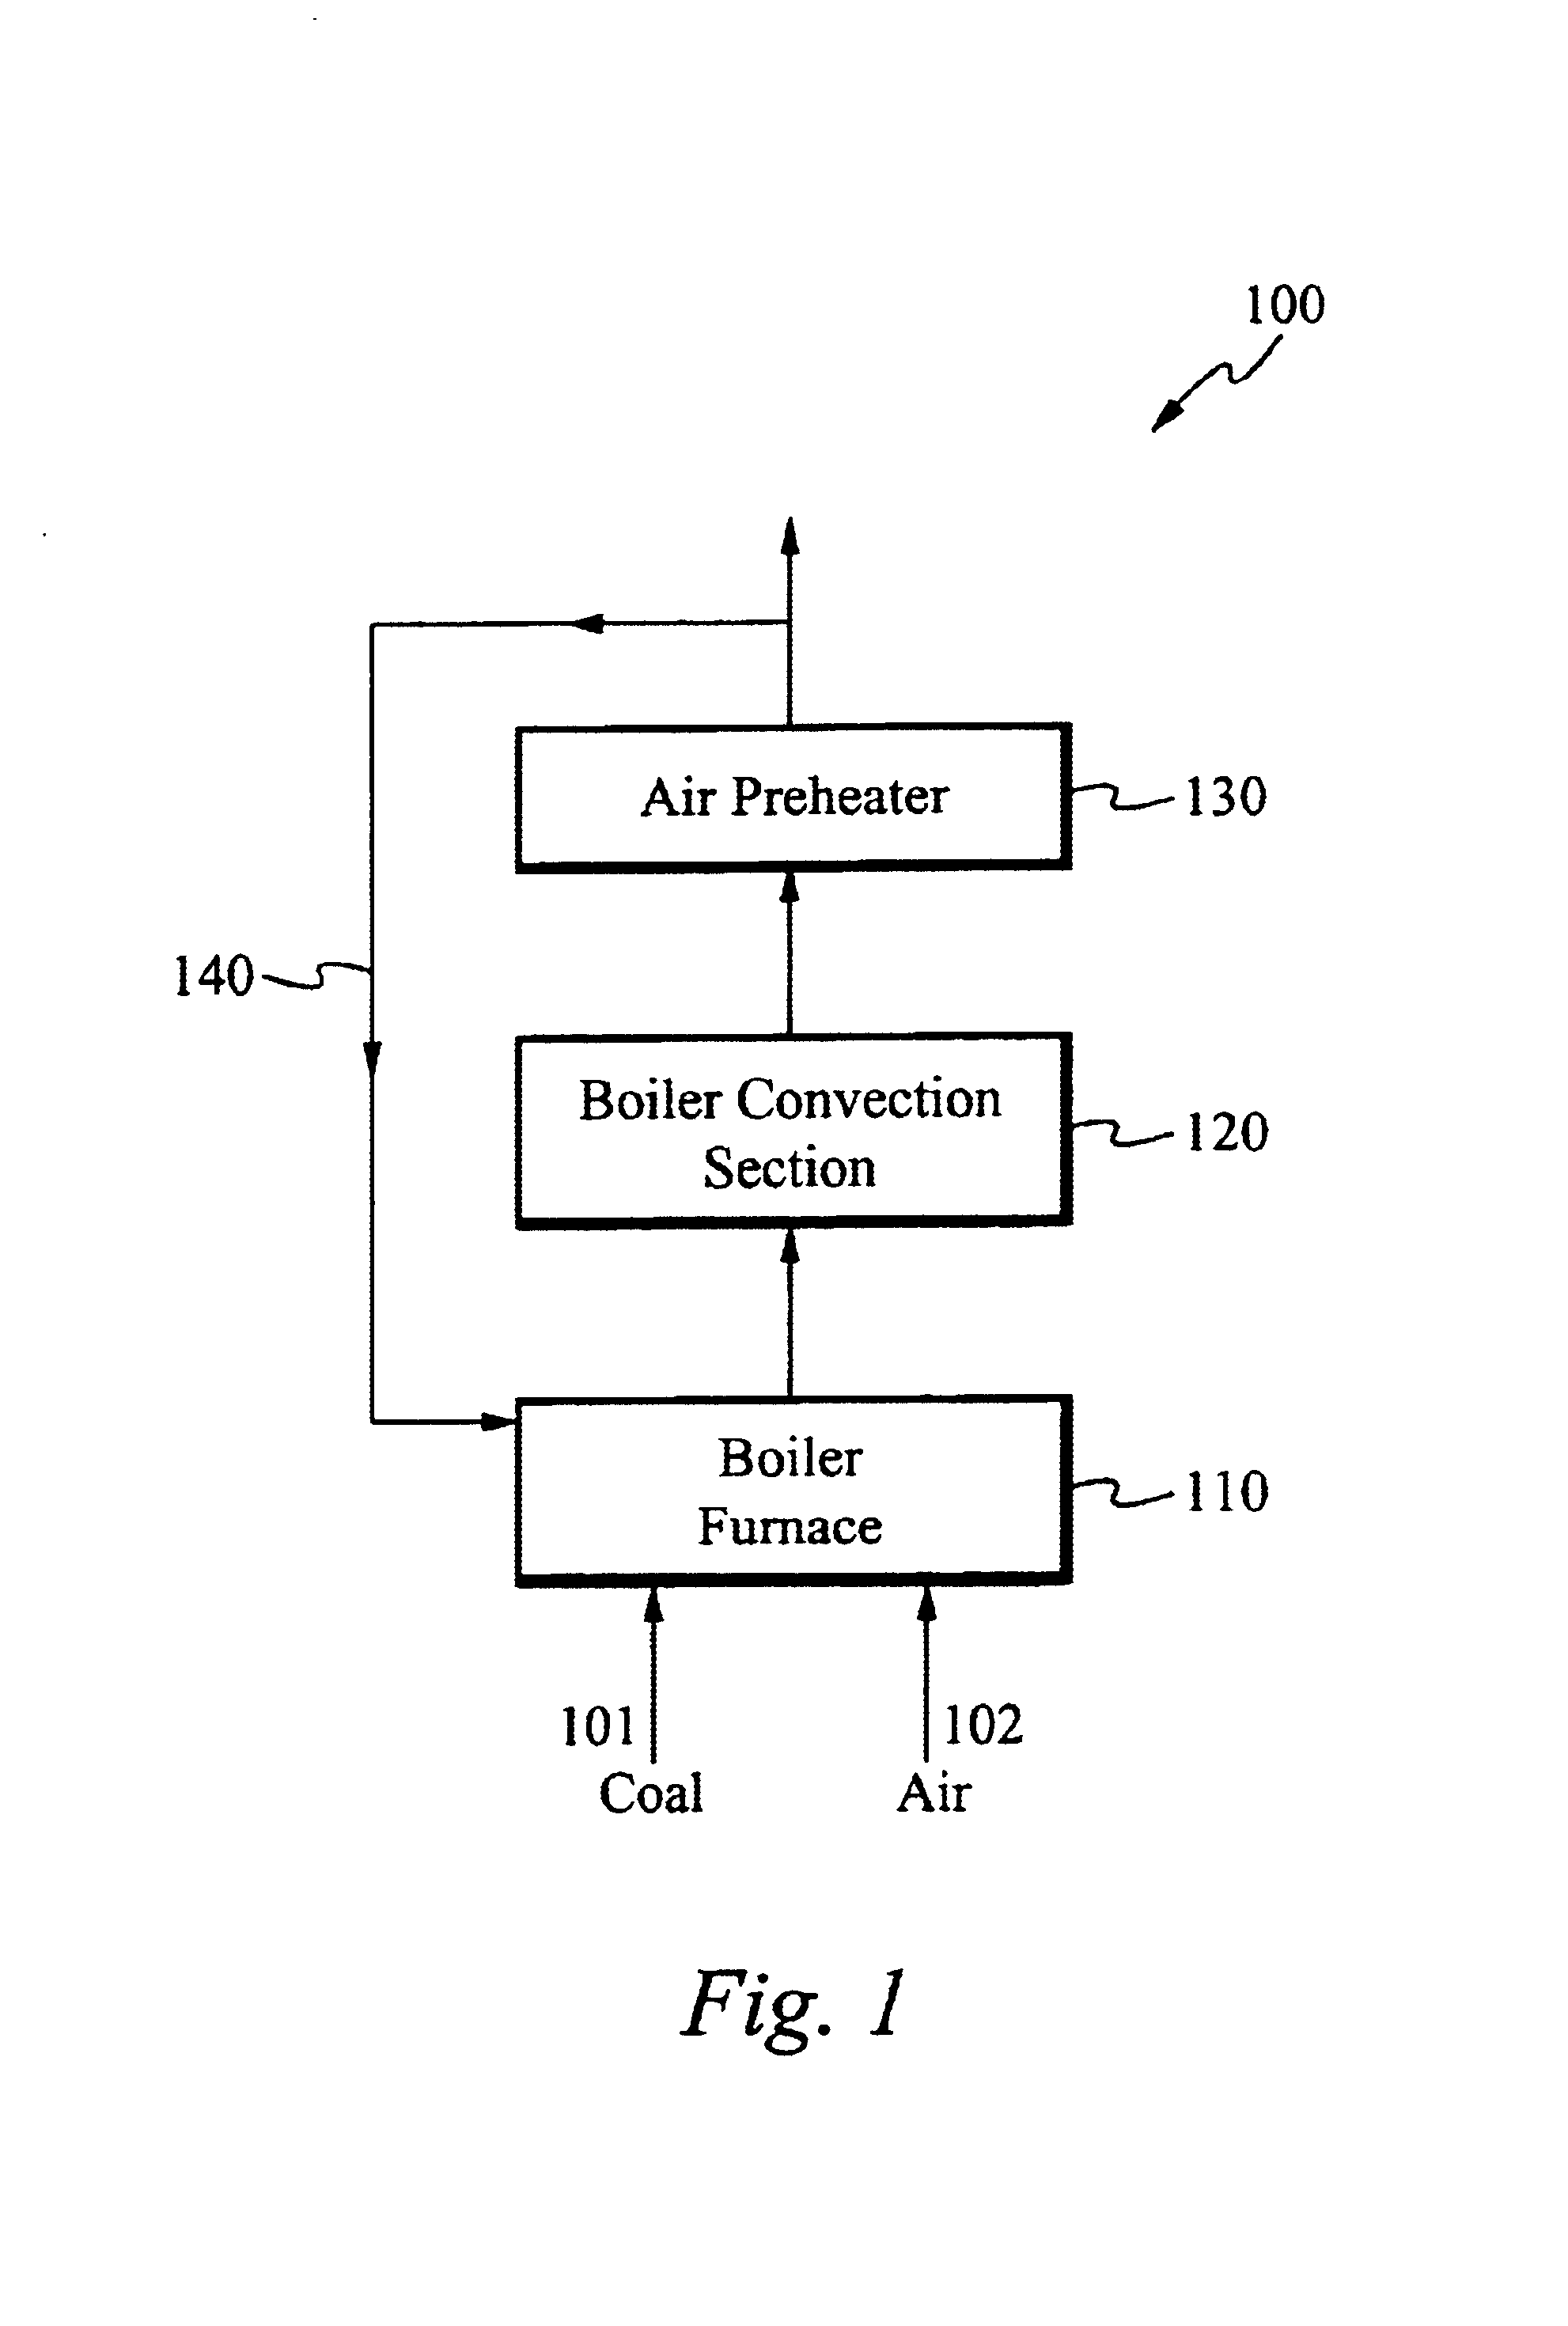 Method for reduction of slagging and fouling of the waterwalls and of the firebox and superheater and reheater of steam boilers with coal combustion